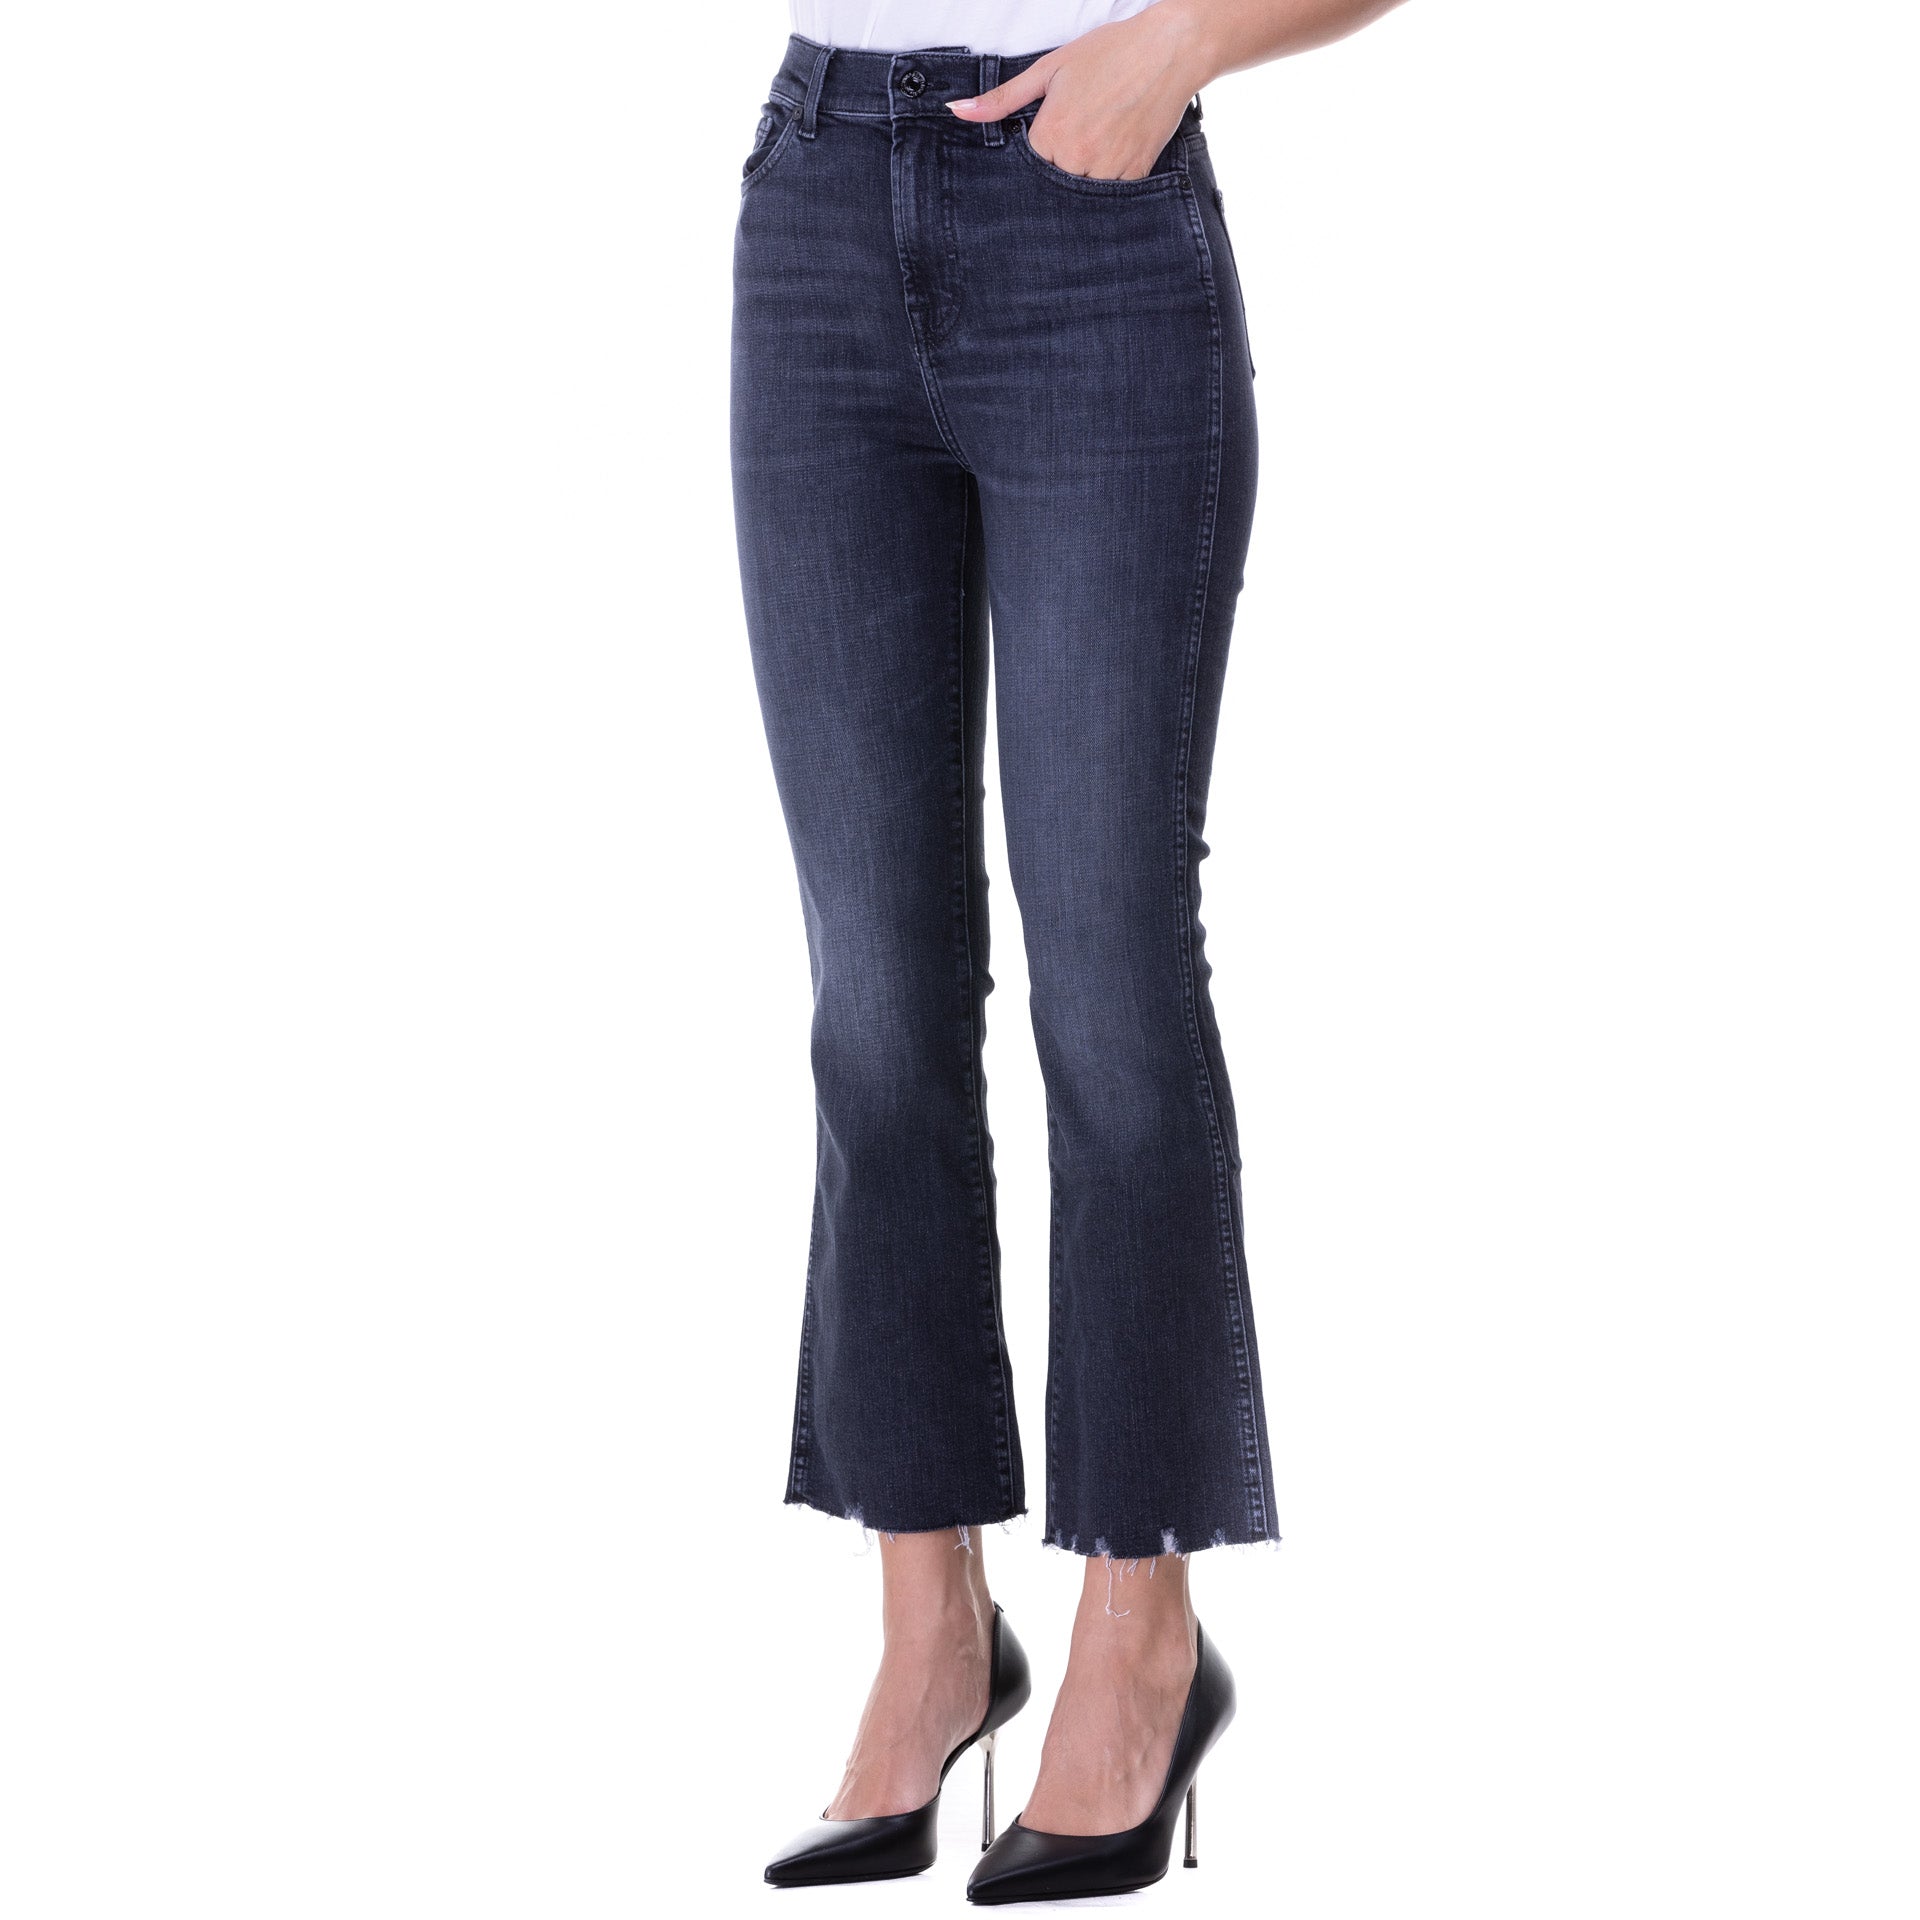 JEANS 7 FOR ALL MANKIND - Avant-gardeandria